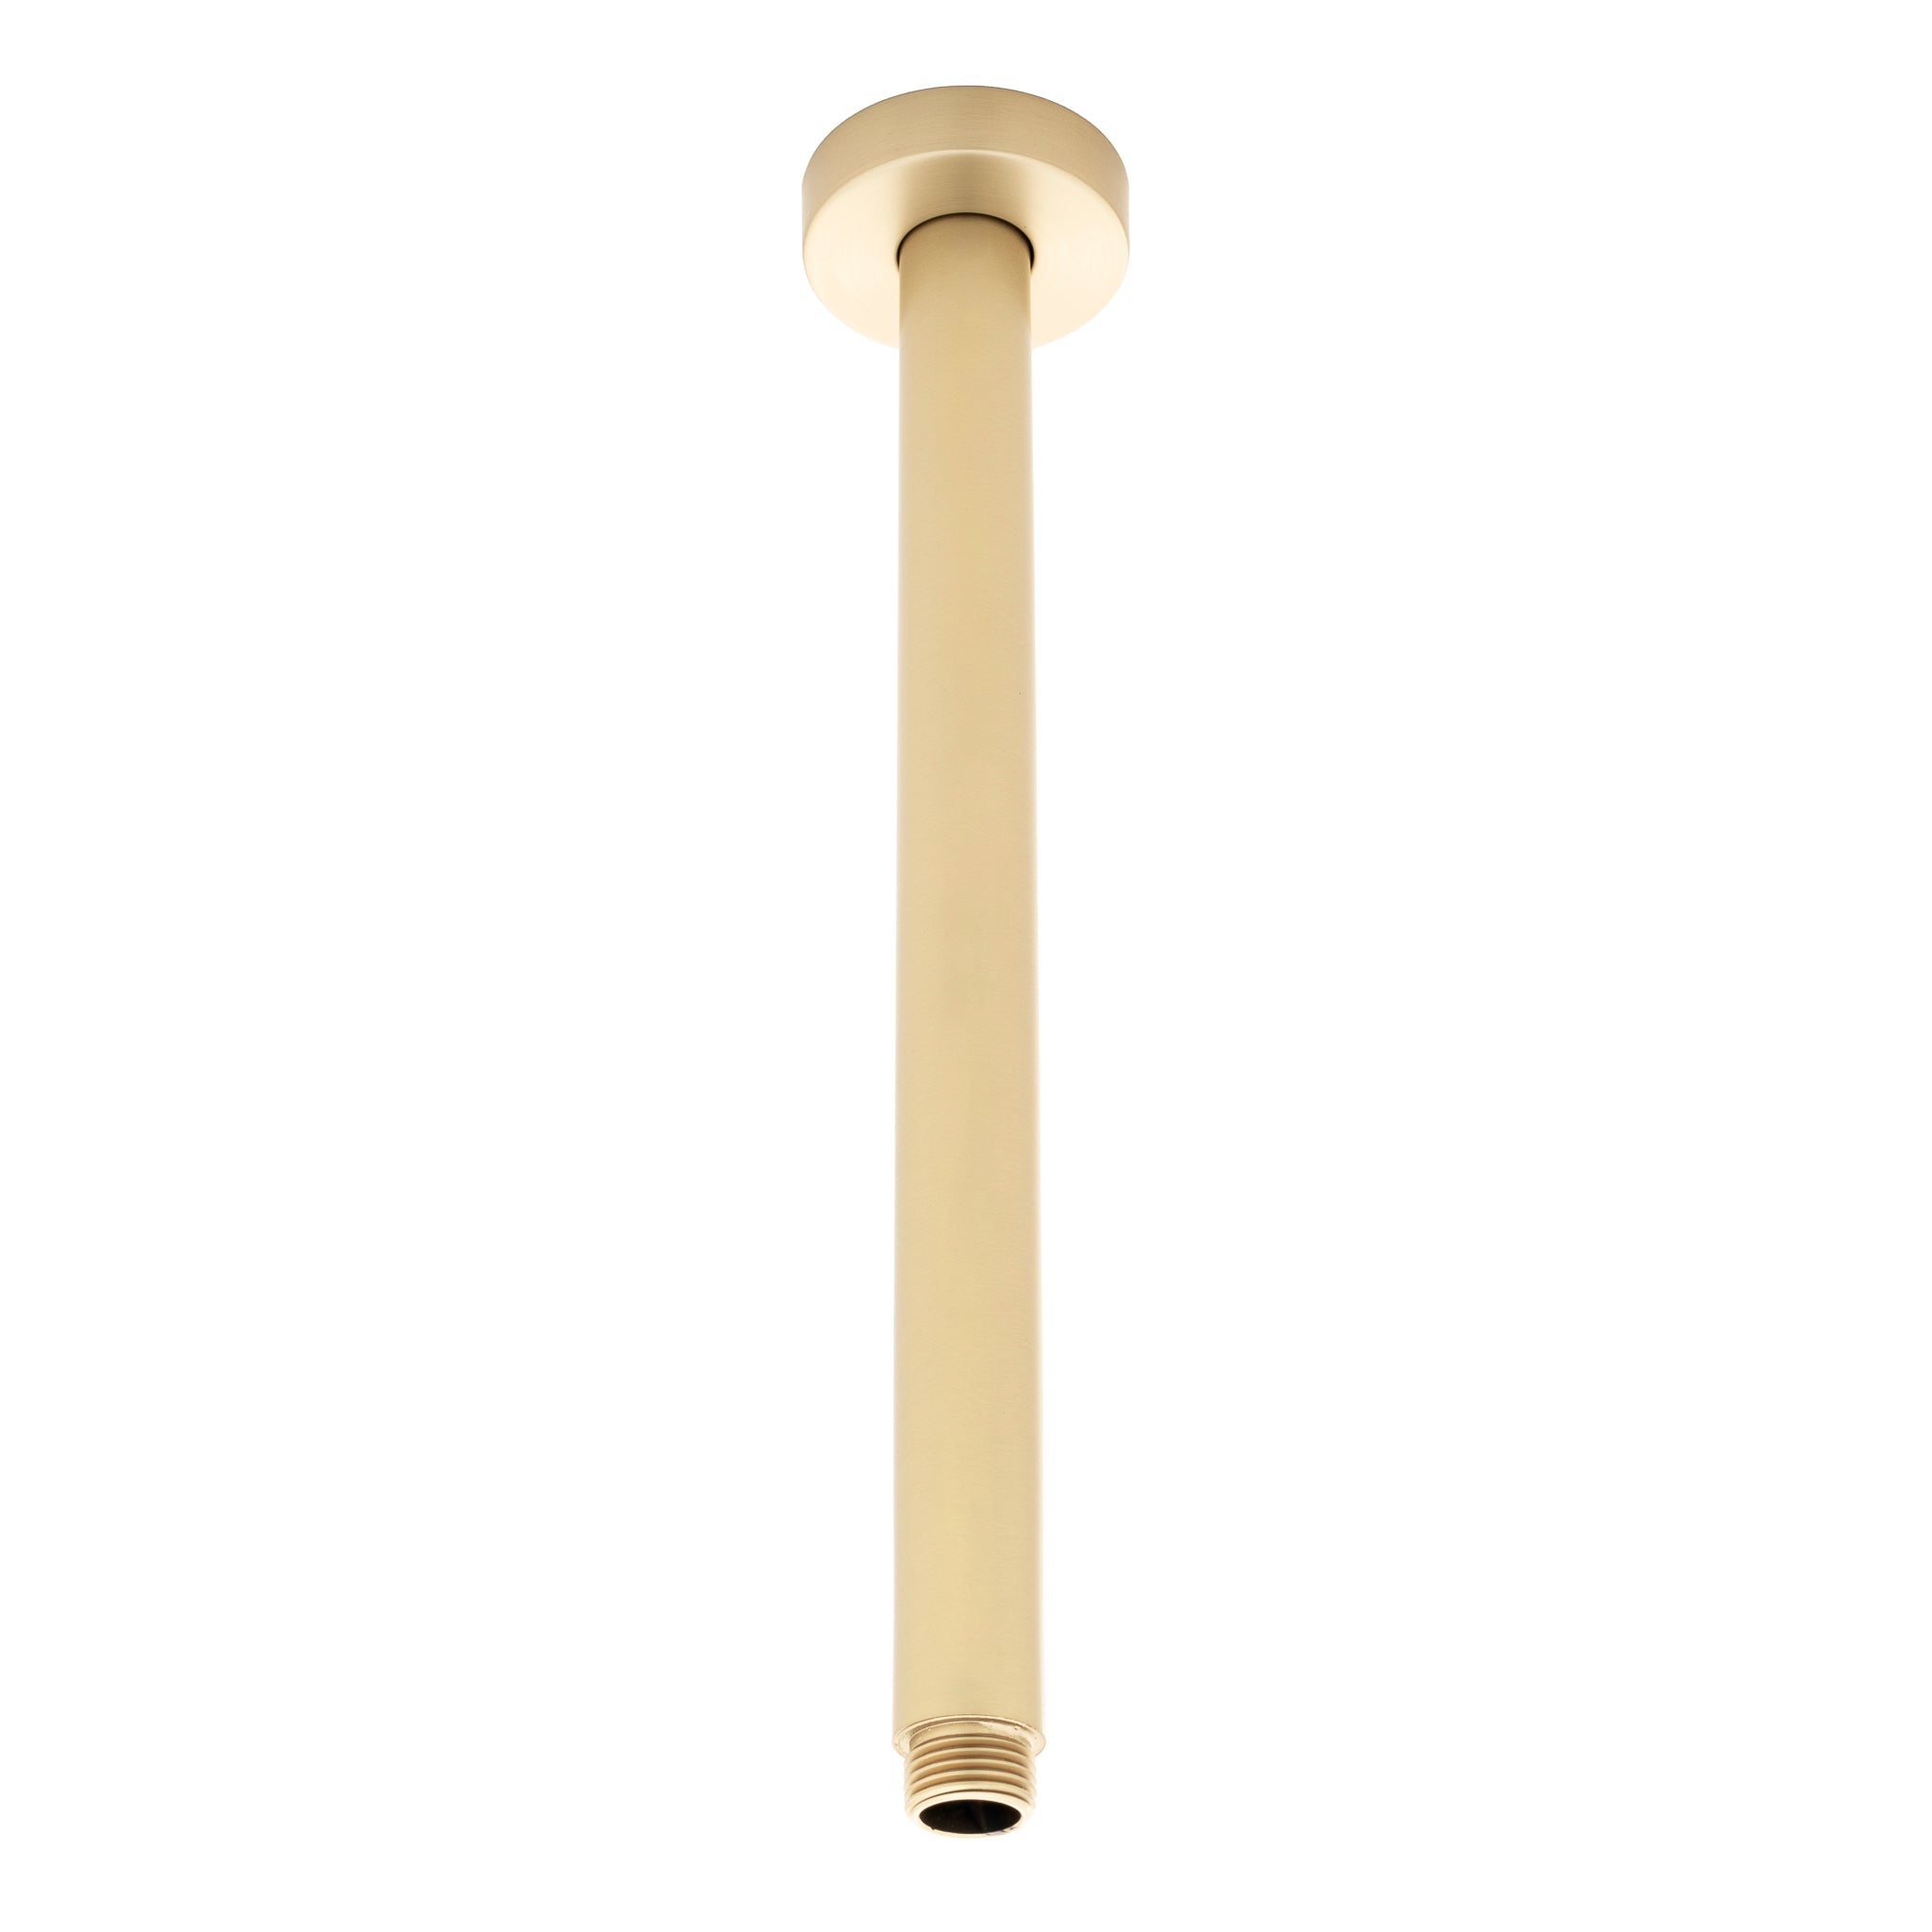 Round 300mm Shower Ceiling Dropper Arm, Brushed Brass (Gold)